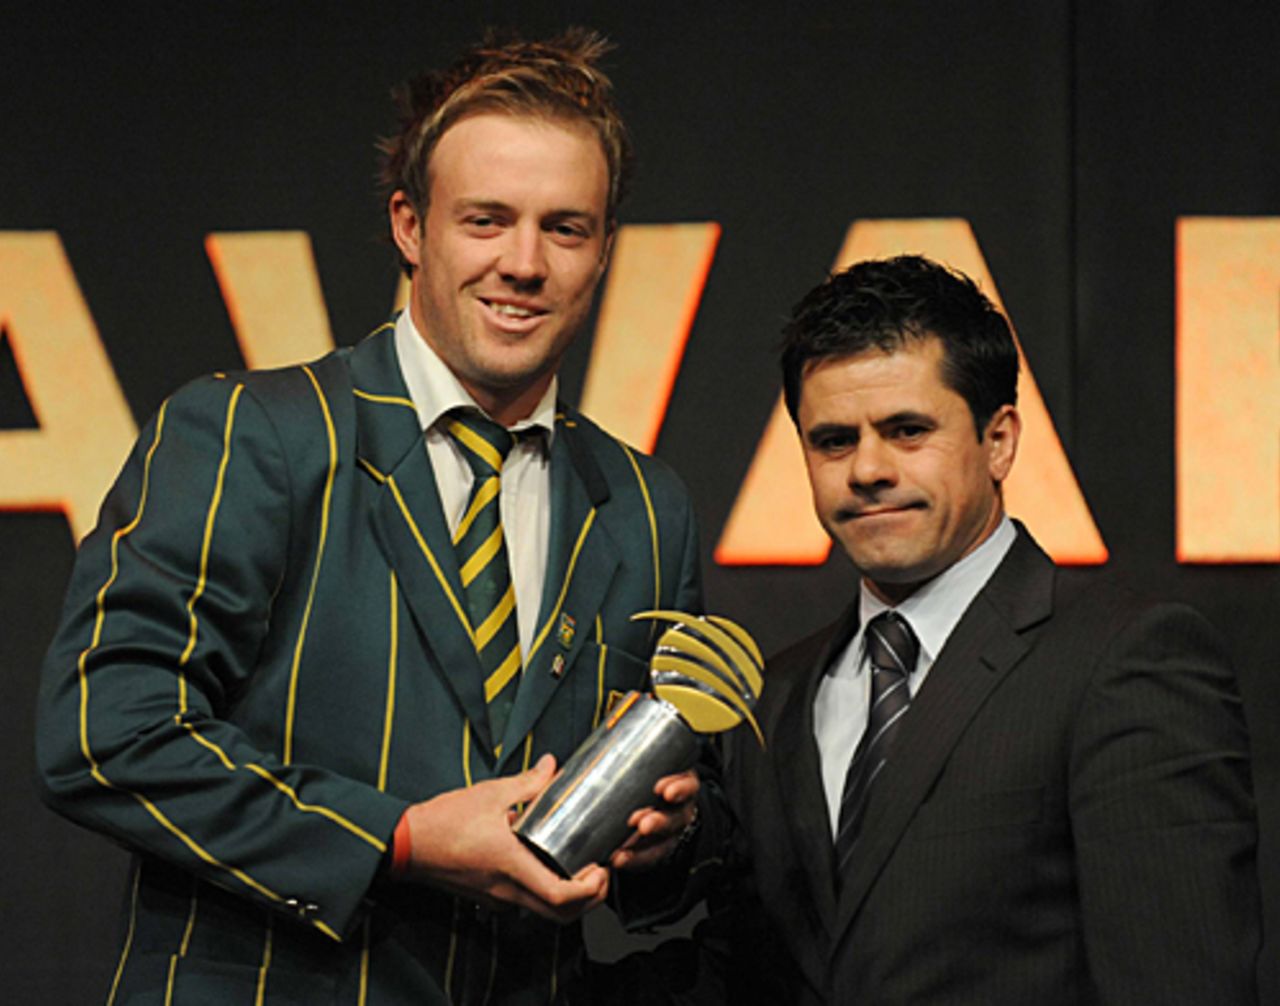 AB de Villiers took the honours for ODI Cricketer of the Year, Johannesburg, June 30, 2009